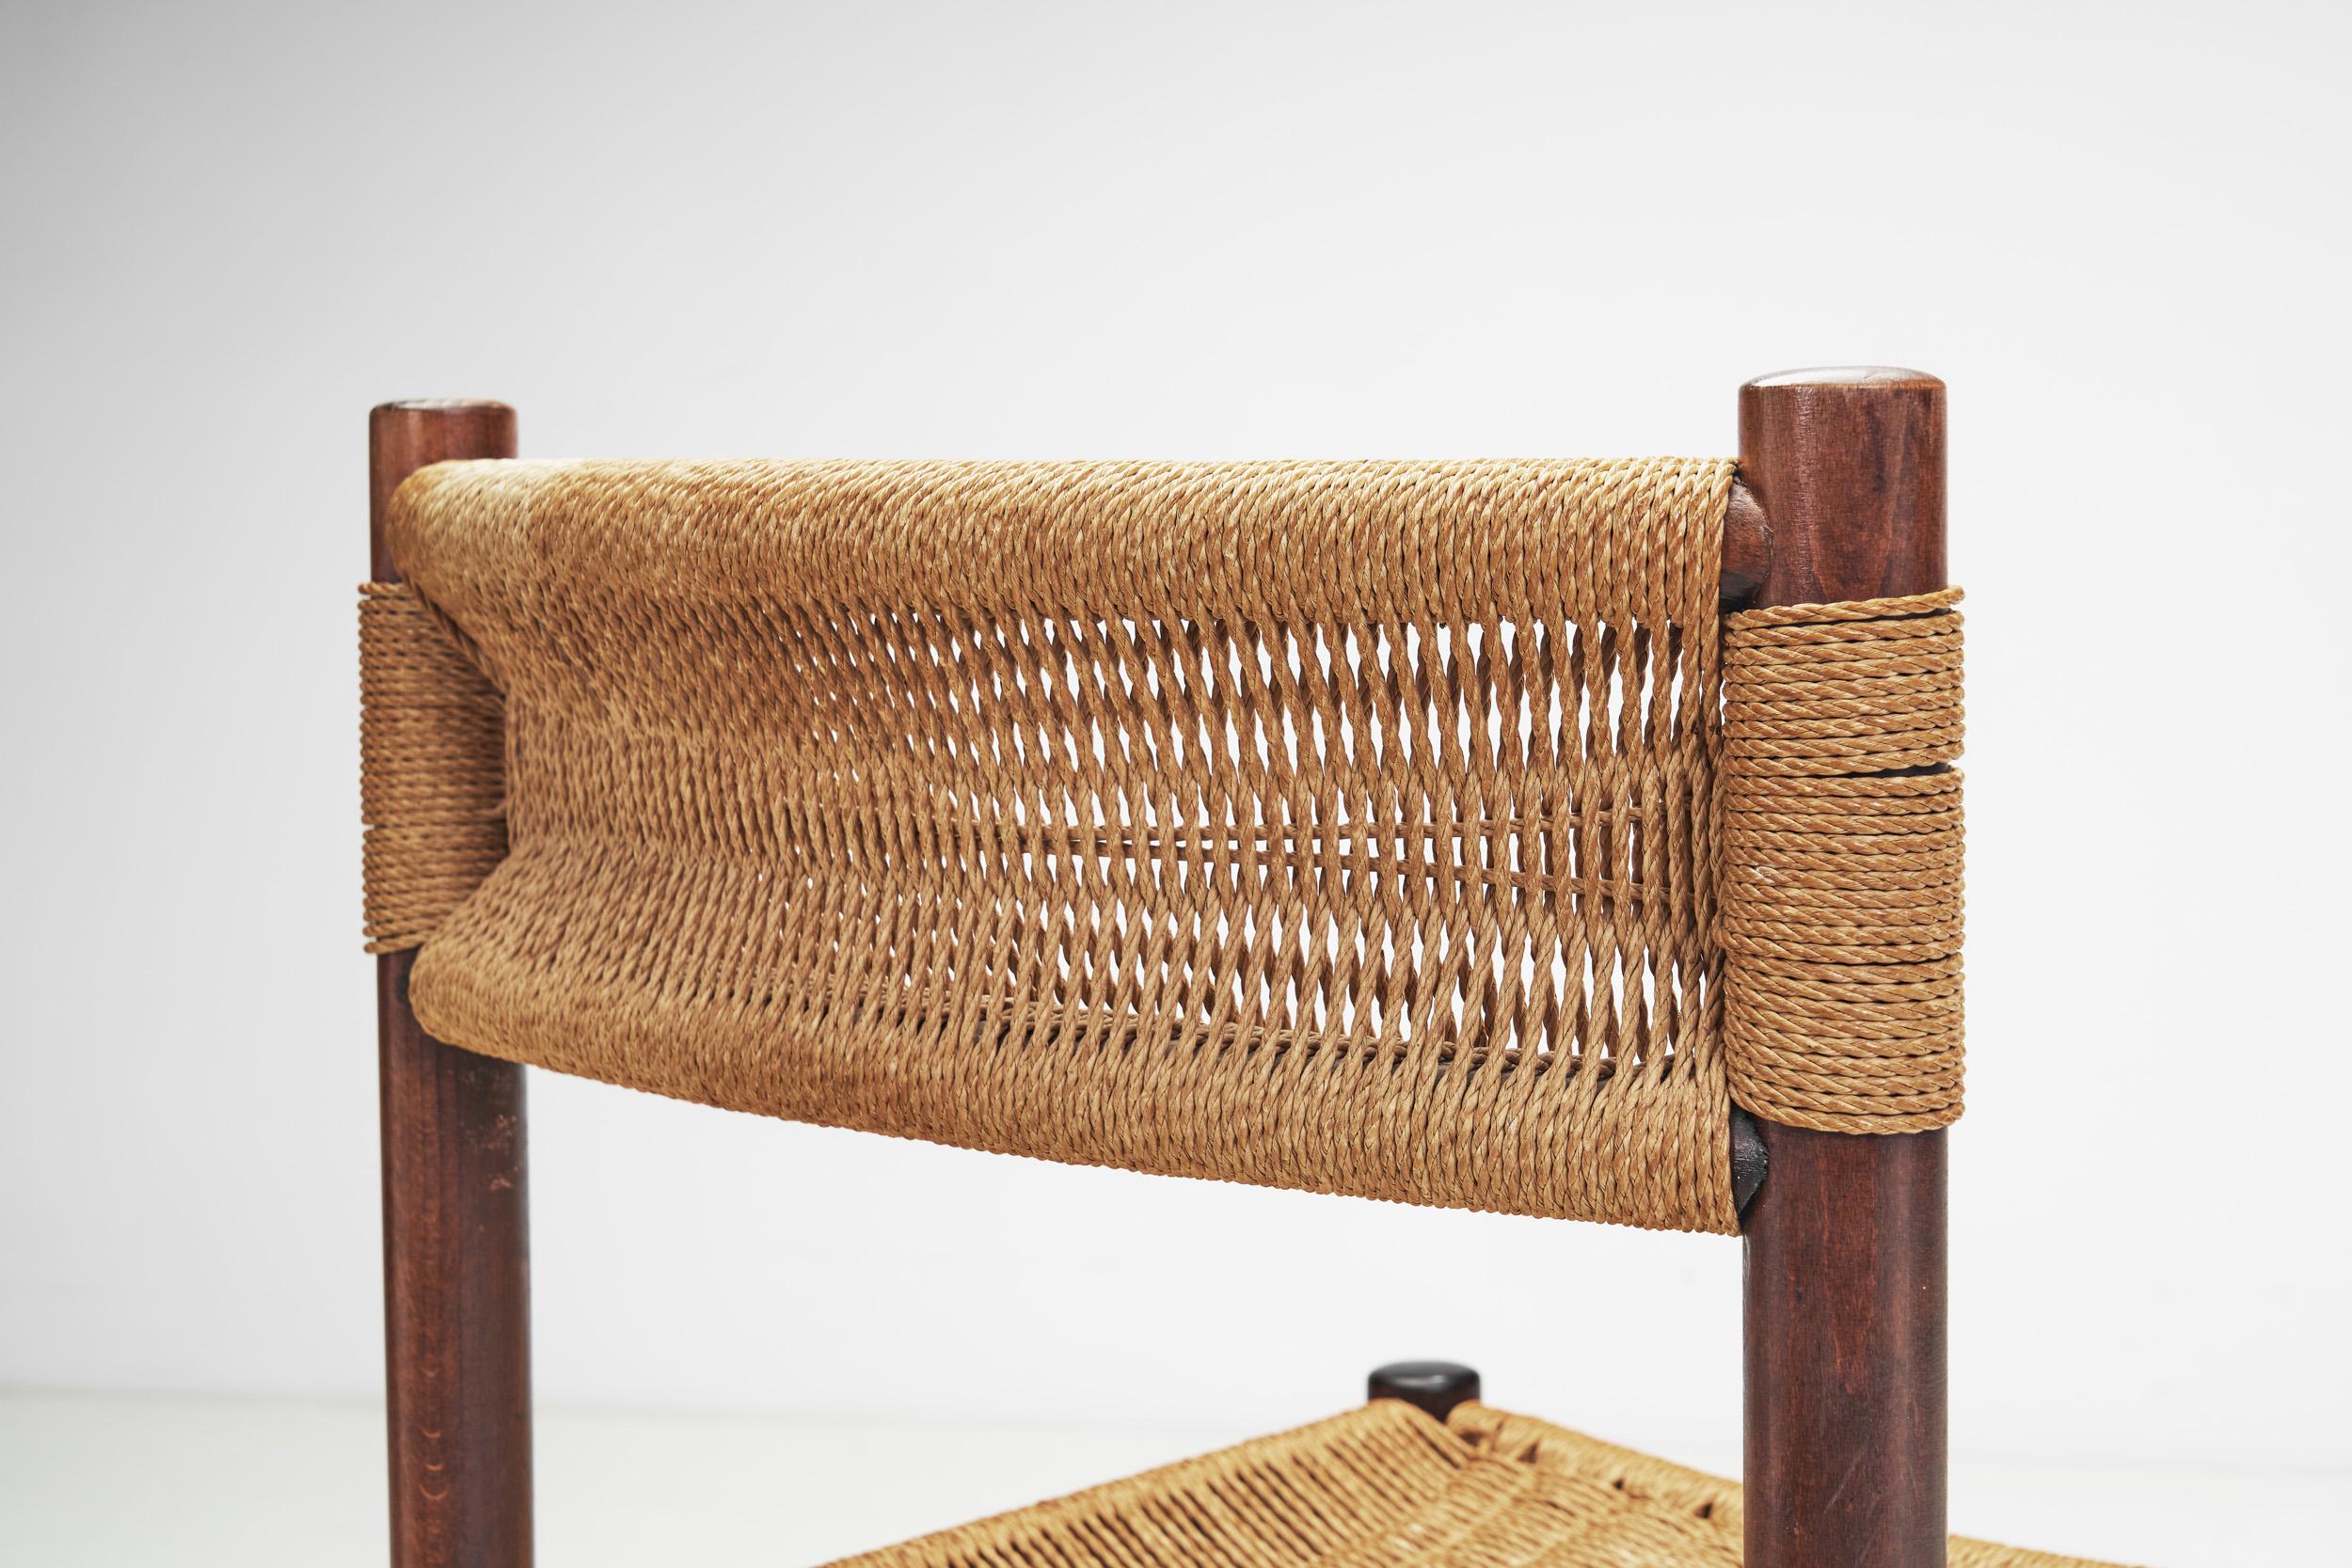 Mid-20th Century “Dordogne” Style Chair with Woven Papercord Seat and Back, Europe ca 1960s For Sale